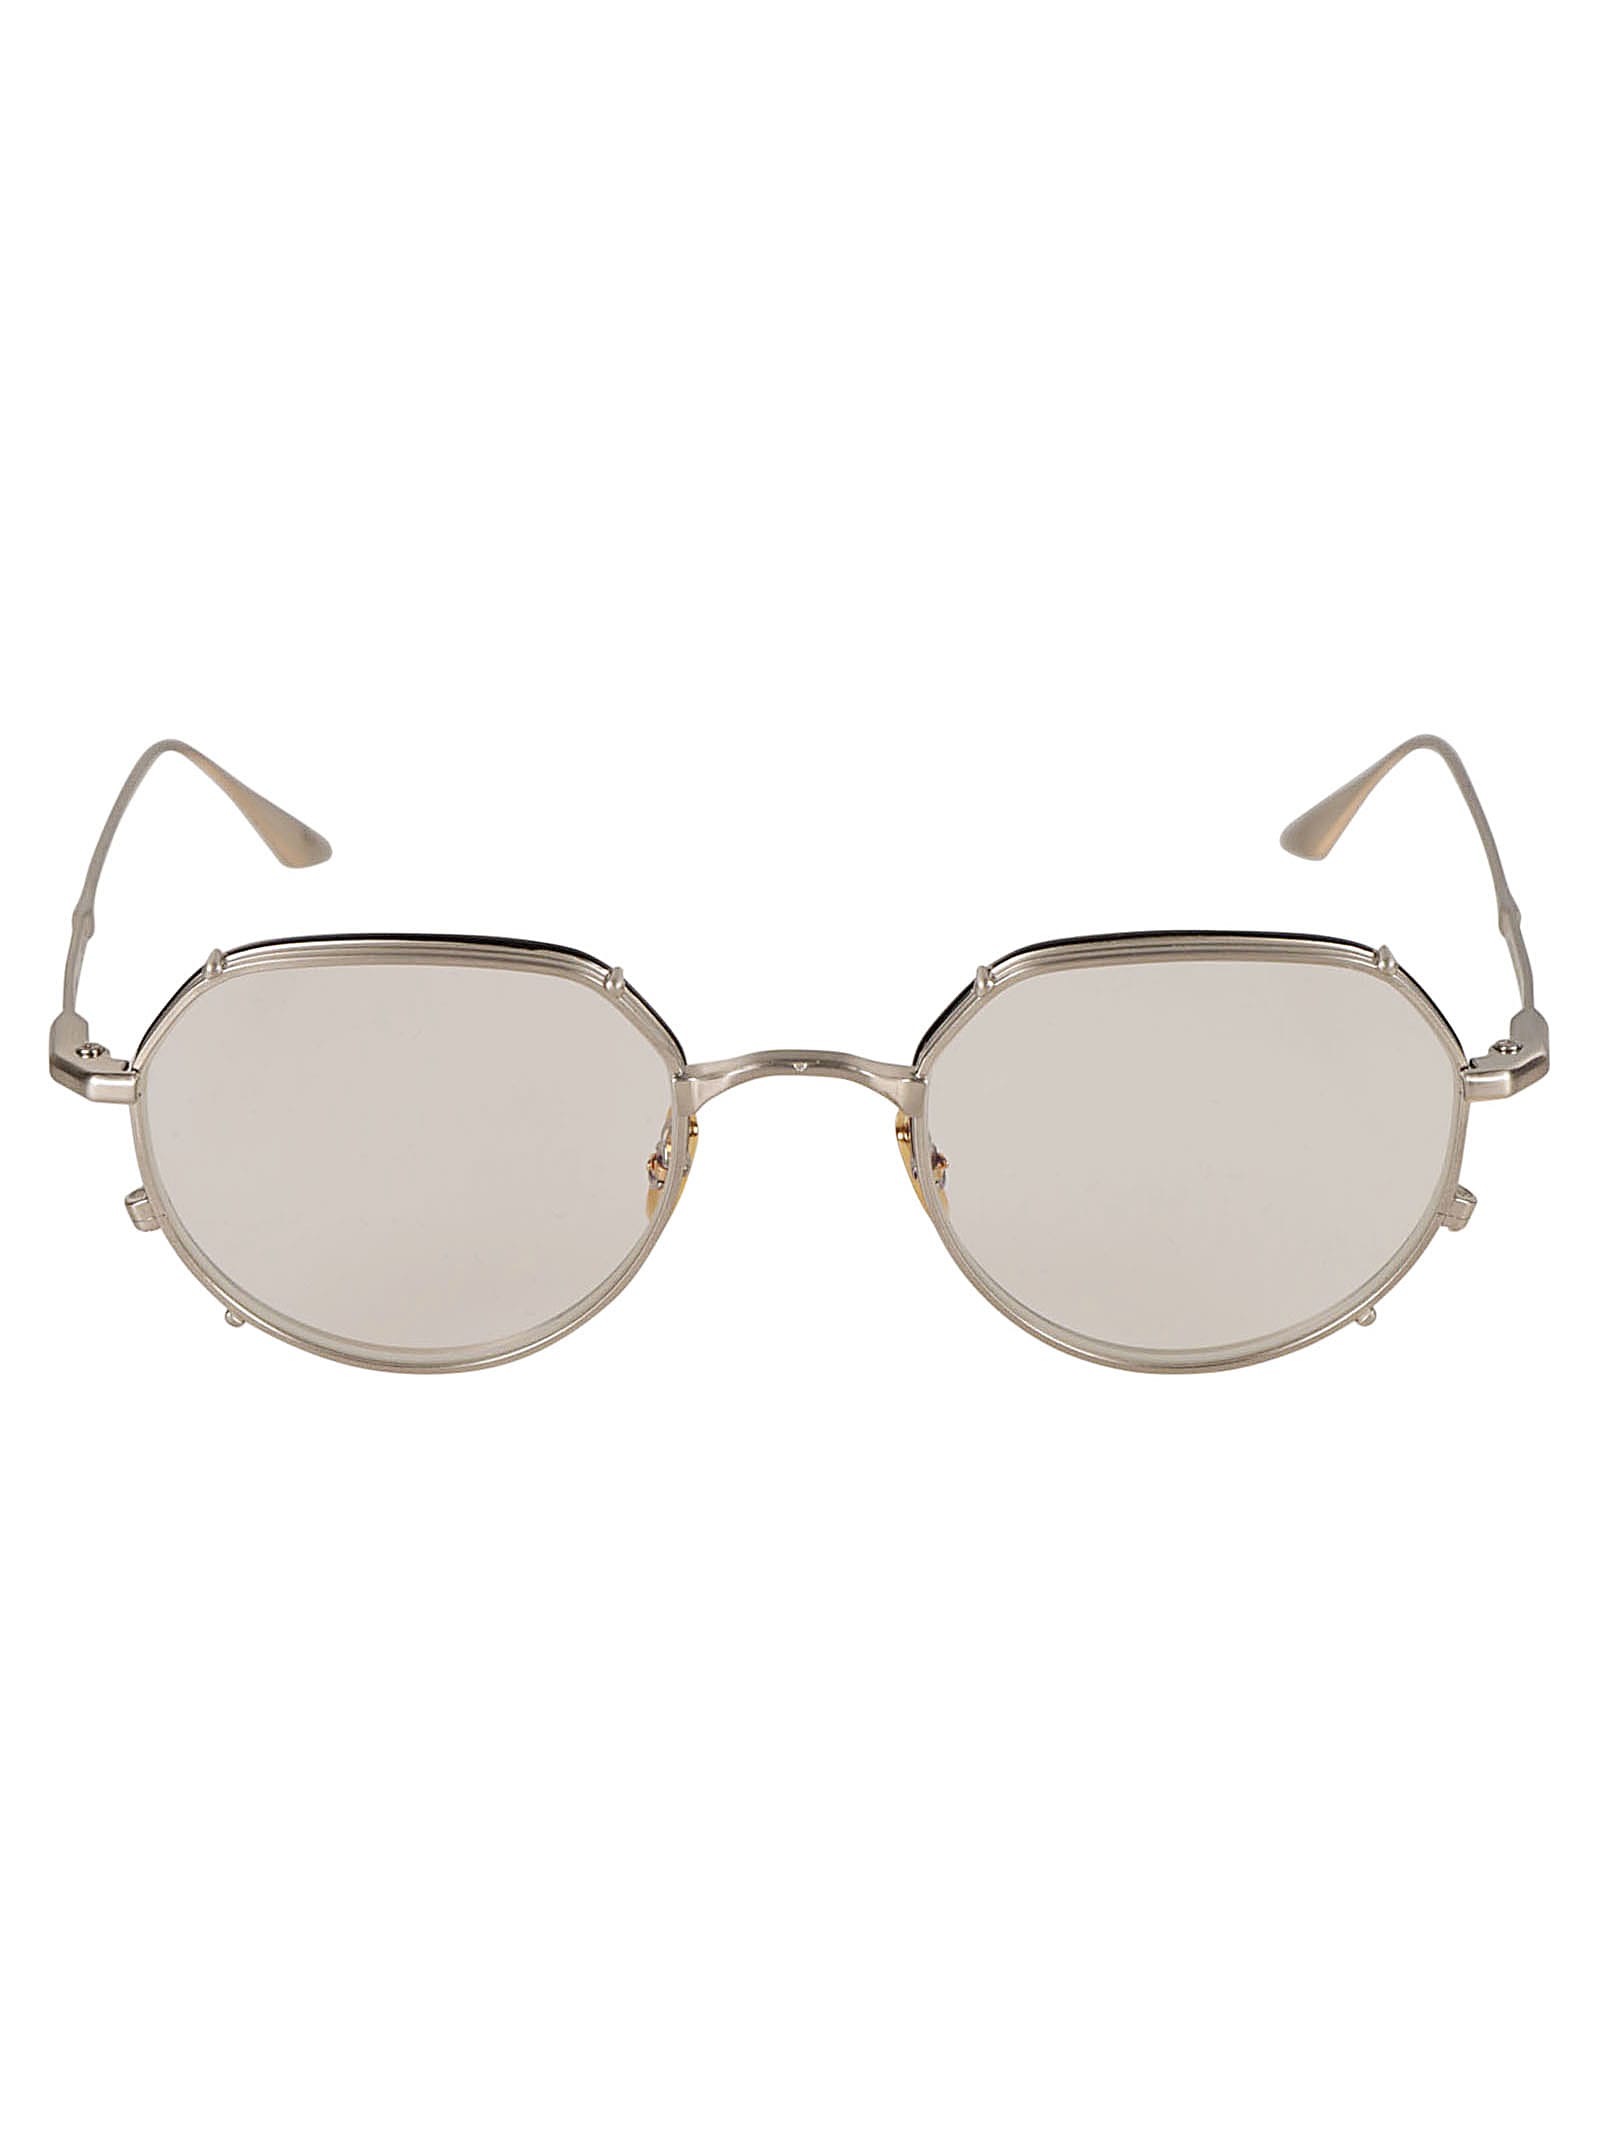 Jacques Marie Mage Hartana Sunglasses Sunglasses In Silver